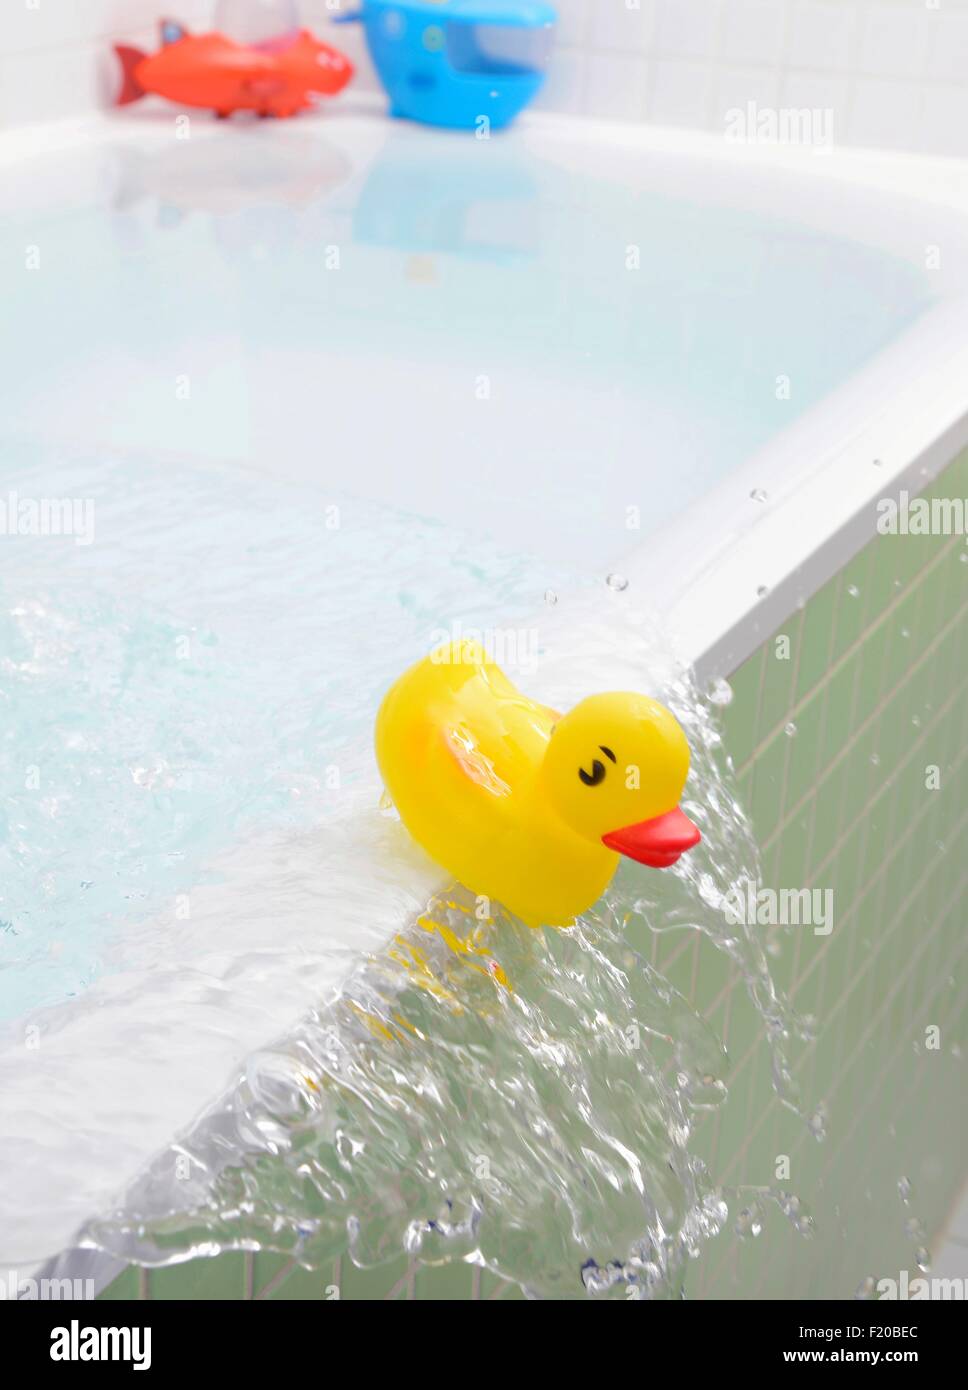 Rubber duck falling out of bath overflowing with water Stock Photo